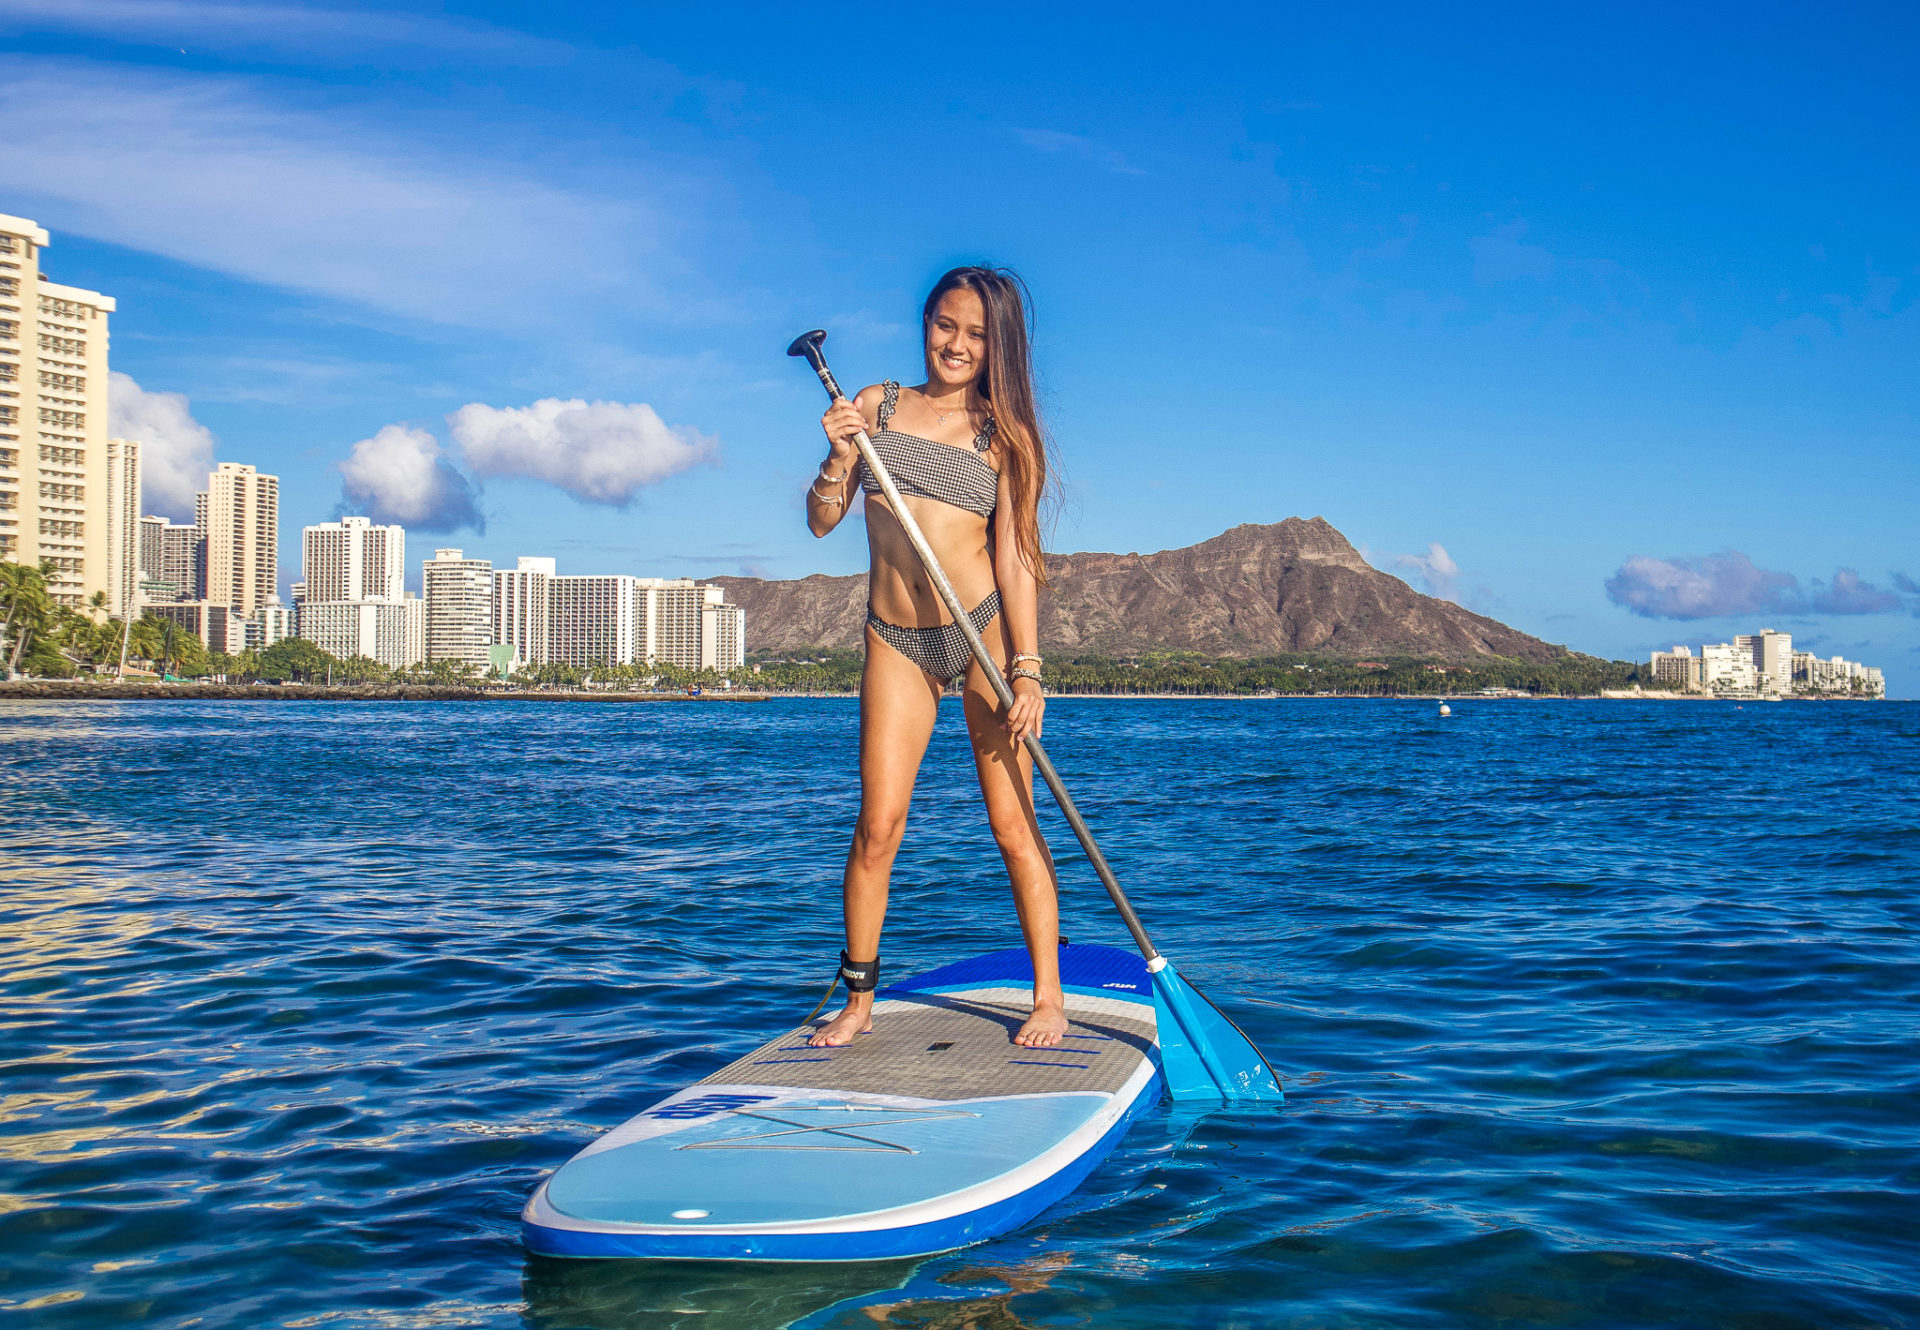 Stand Up Paddleboard (SUP) Rental